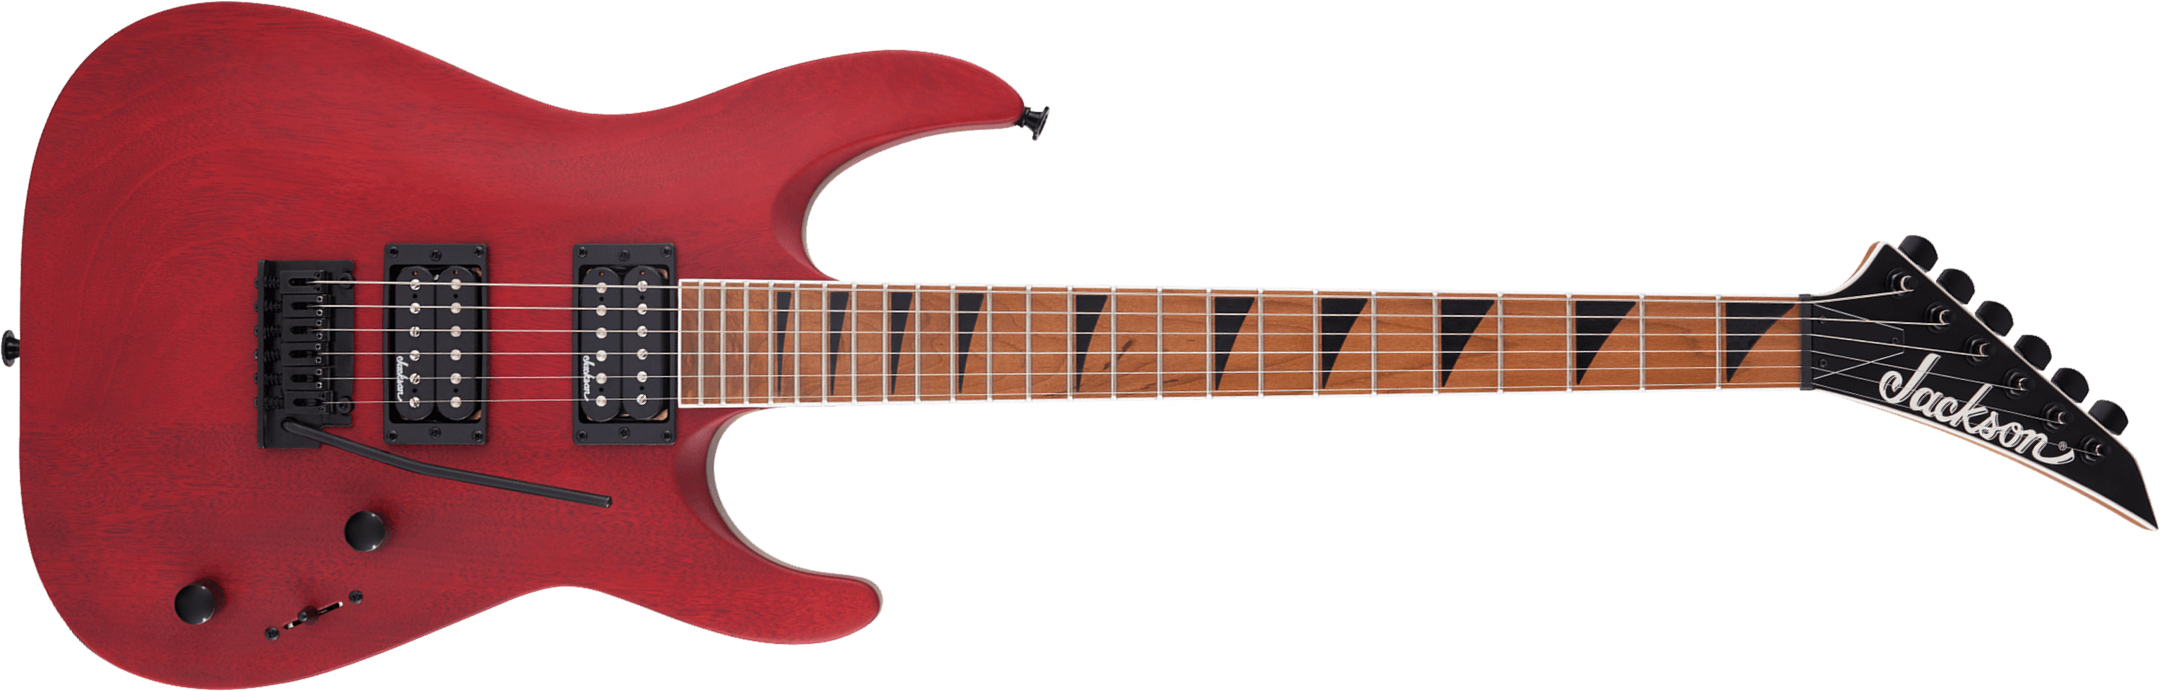 Jackson Dinky Js24 Dkam Arch Top 2h Trem Mn - Red Stain - E-Gitarre in Str-Form - Main picture